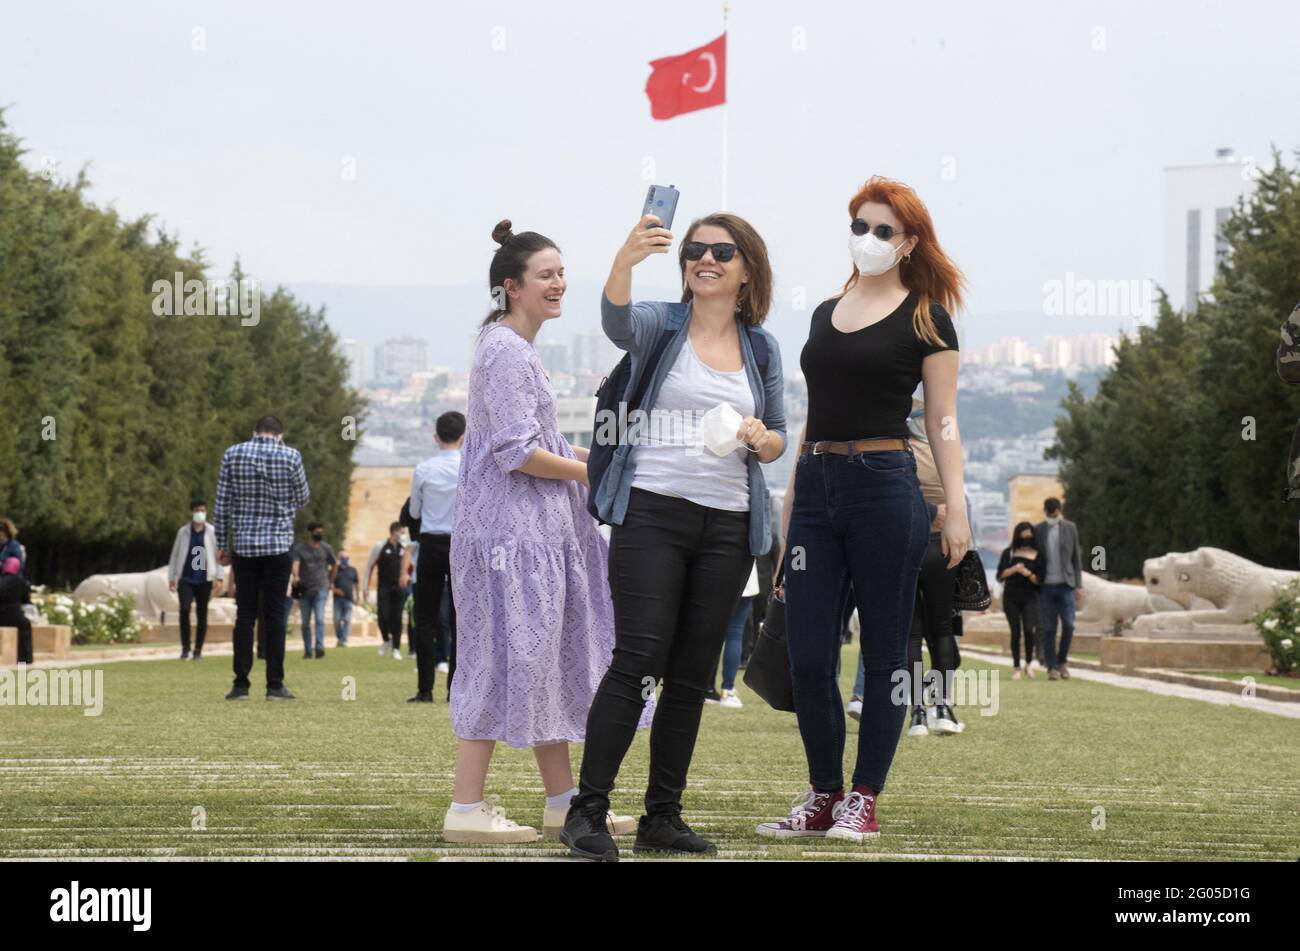 People wear face masks as a preventive measure against the spread of the COVID-19 novel coronavirus, at Anitkabir, the mausoleum of Mustafa Kemal Ataturk, the founder of the Turkish Republic, in Ankara Turkey, on May 31, 2021. Turkey has confirmed 47,527 deaths and 5,249,404 positive cases of the coronavirus infection in the country. Turkey started easing its strict coronavirus lockdown on Monday by allowing movement during the day while keeping overnight and weekend curfews in place, the Interior Ministry said in a directive on Sunday. Photo by Abdurrahman Antakyali/Depo Photos/ABACAPRESS.COM Stock Photo